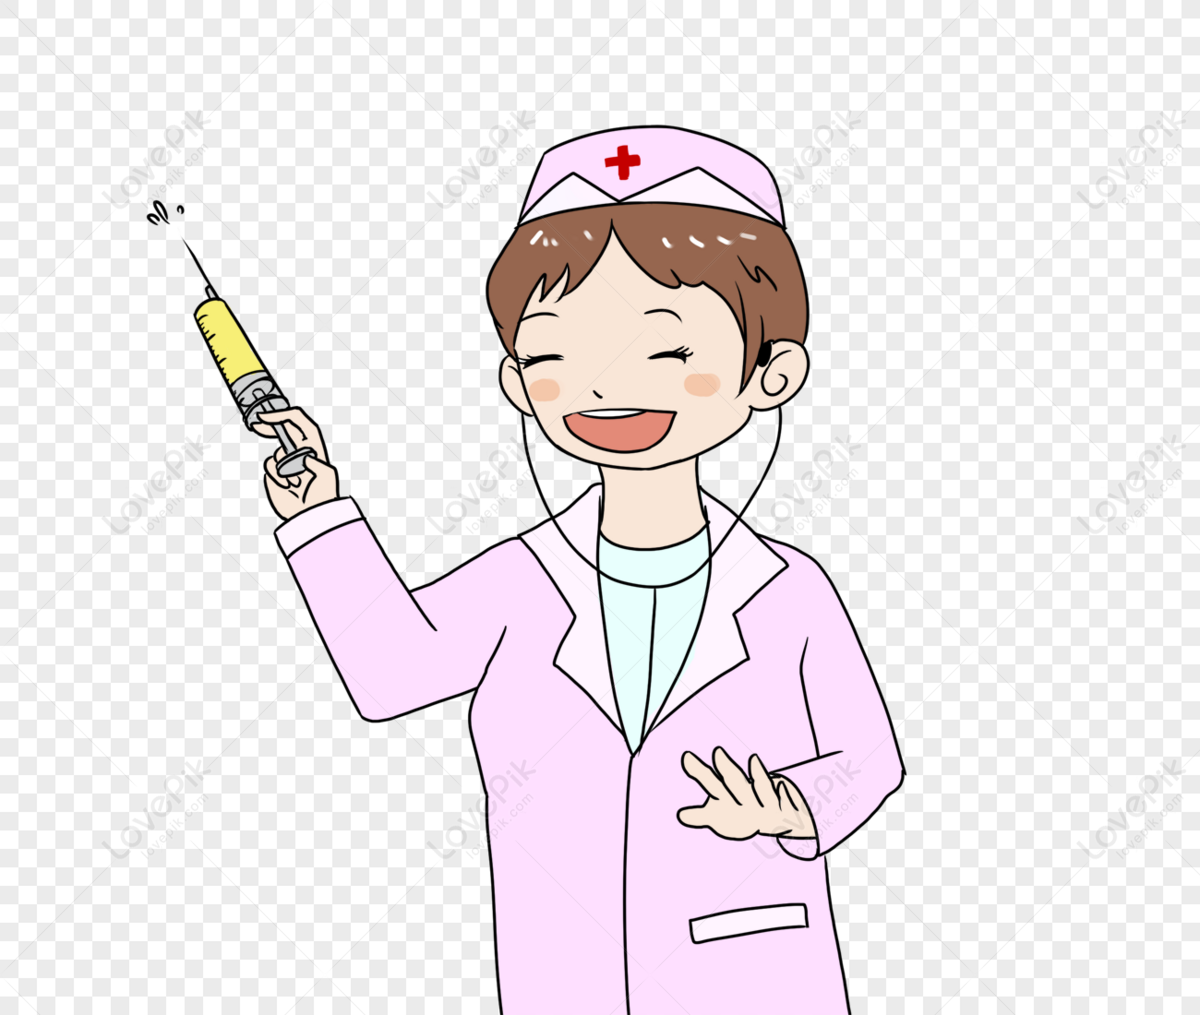 A Doctor Who Injections For Patients PNG Transparent And Clipart Image For  Free Download - Lovepik | 400236806